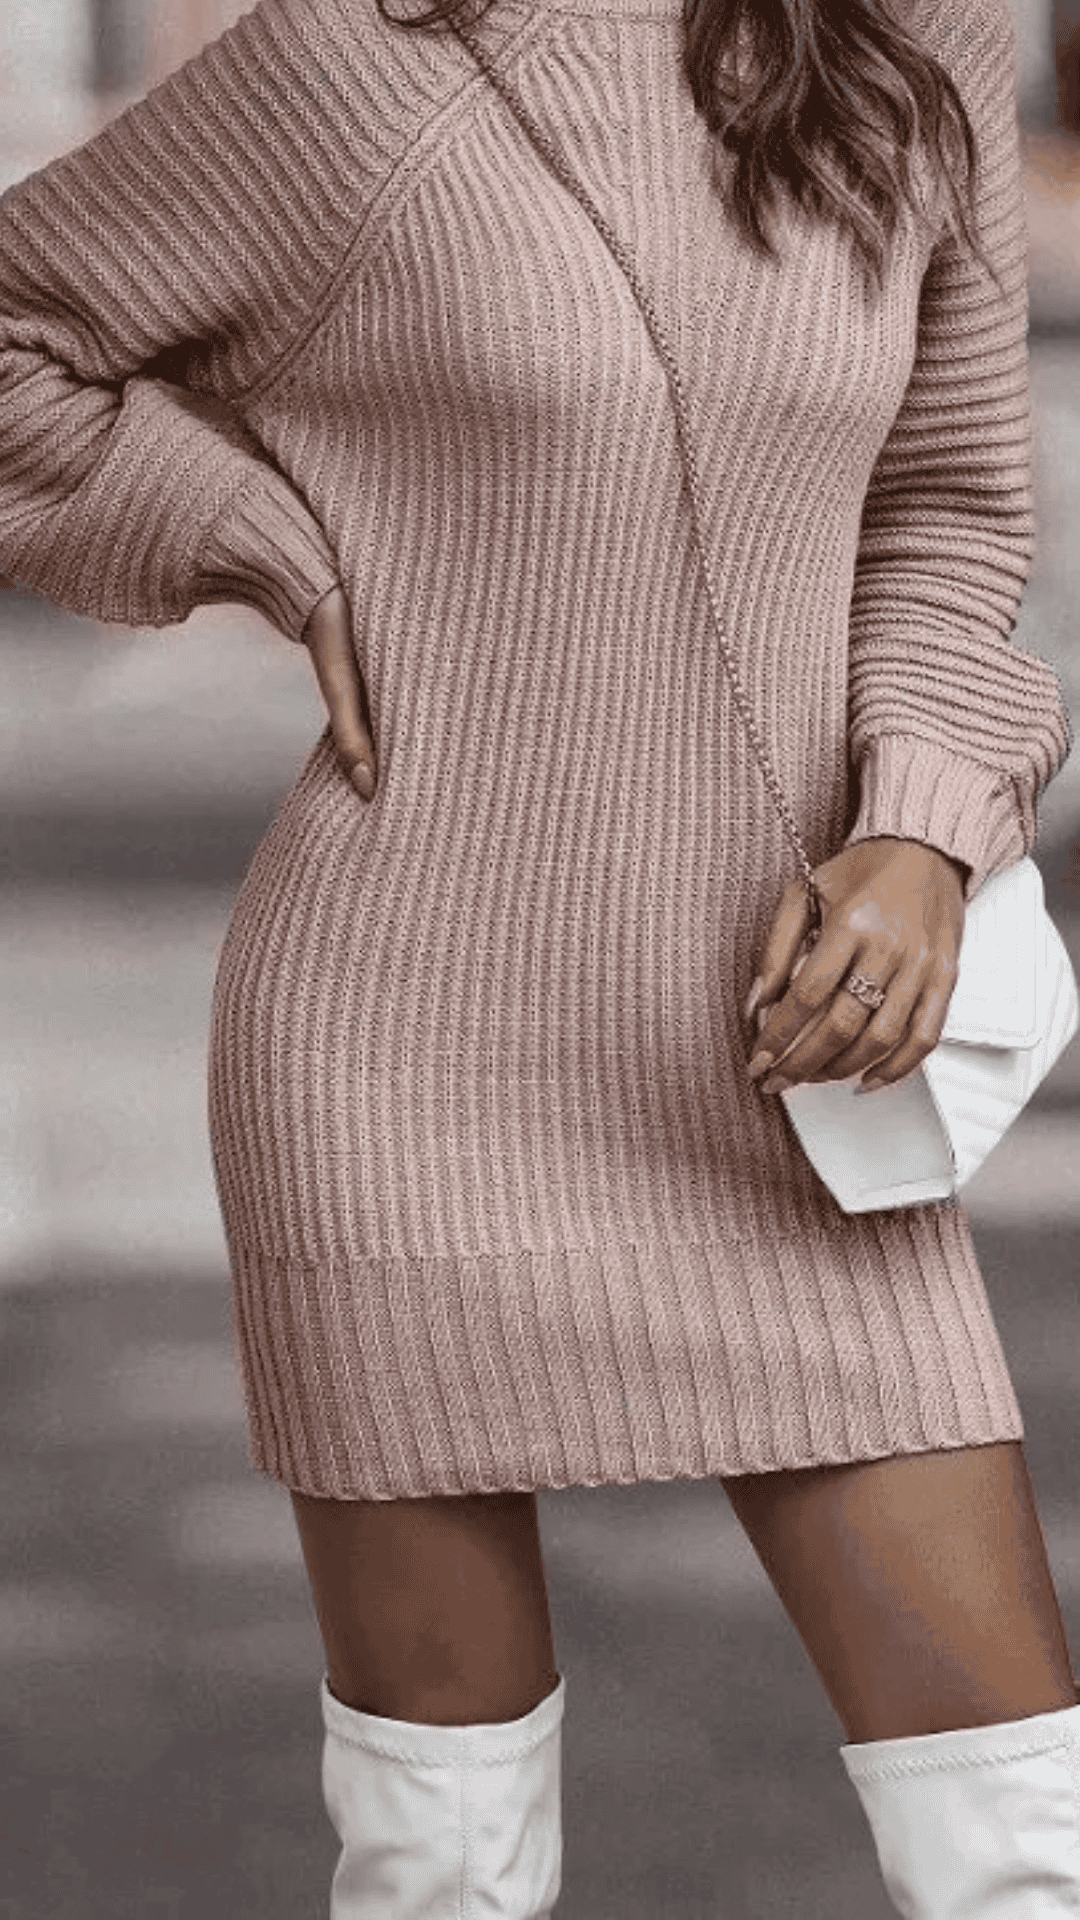 Vintage Knitted Dress Chic Turtleneck Sweater Dress for Women